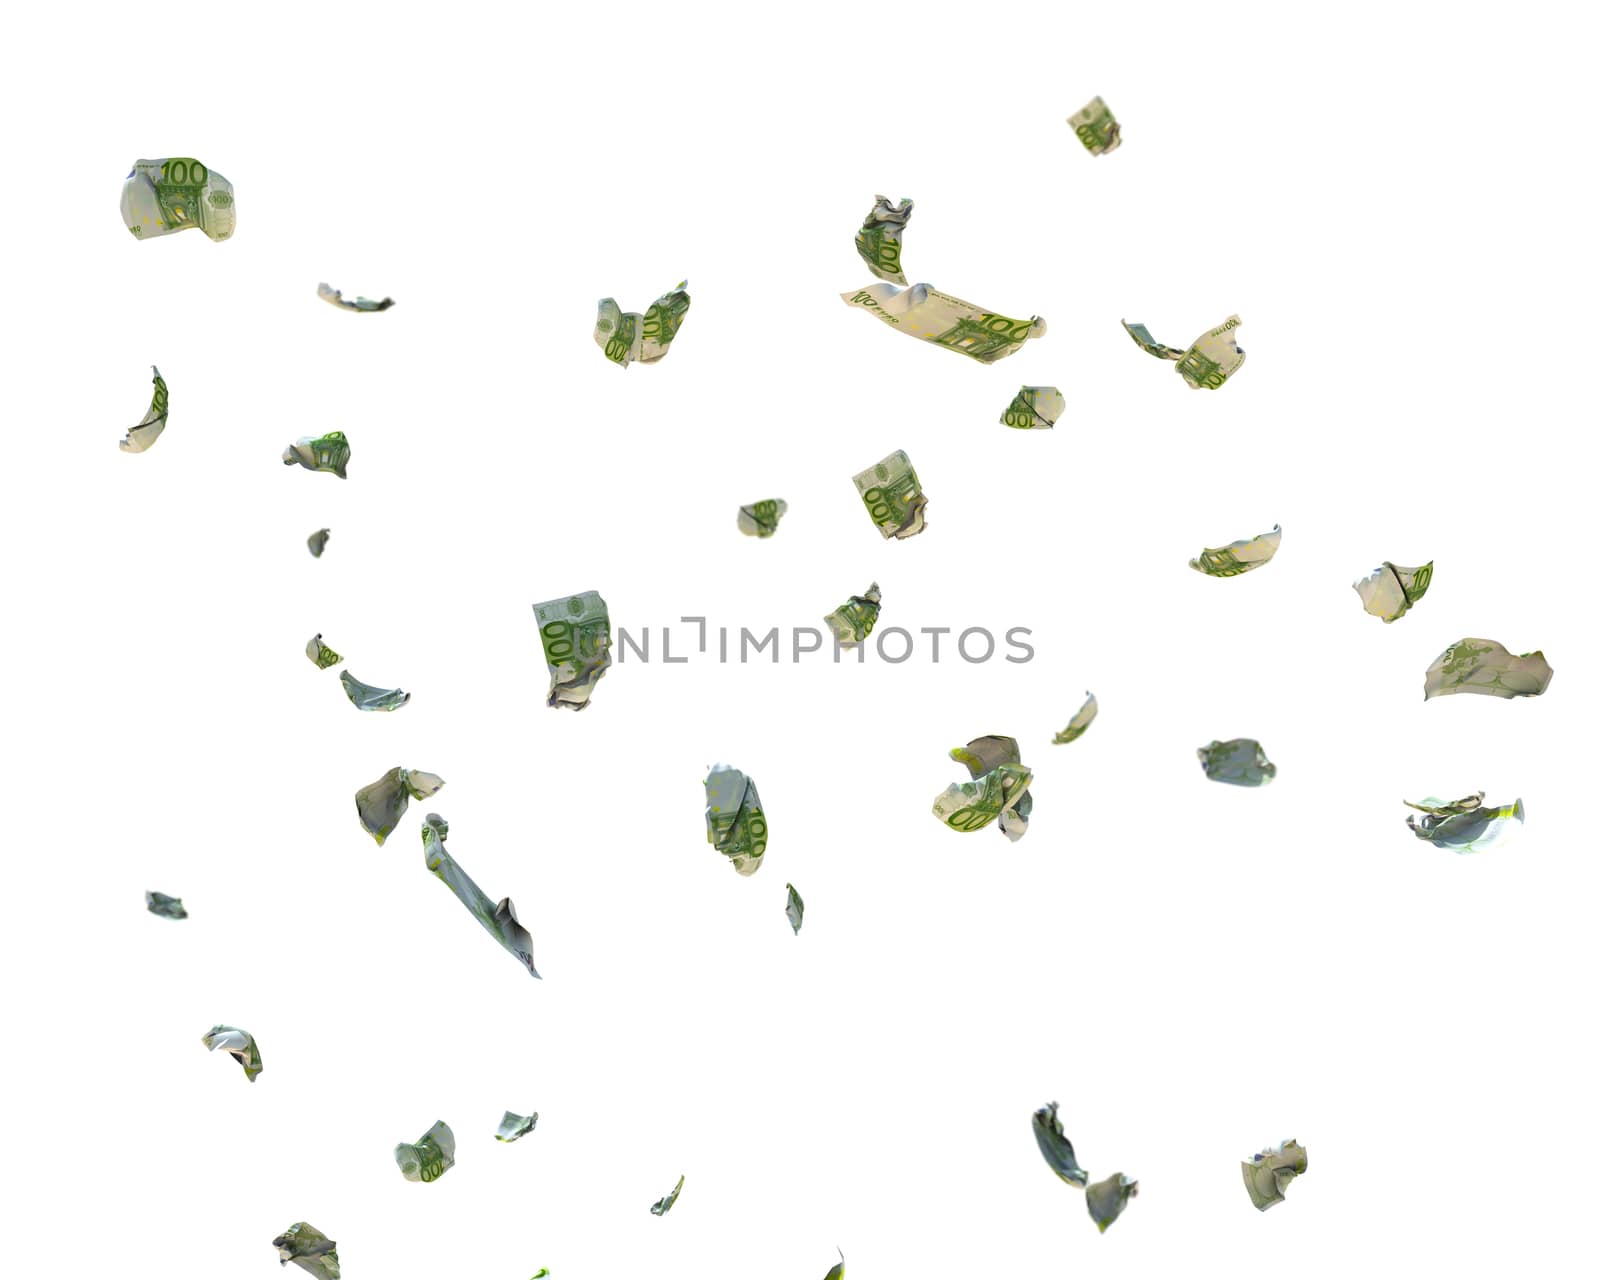 100 Euro Currency Crumpled Banknotes flying, against white, clipping path included